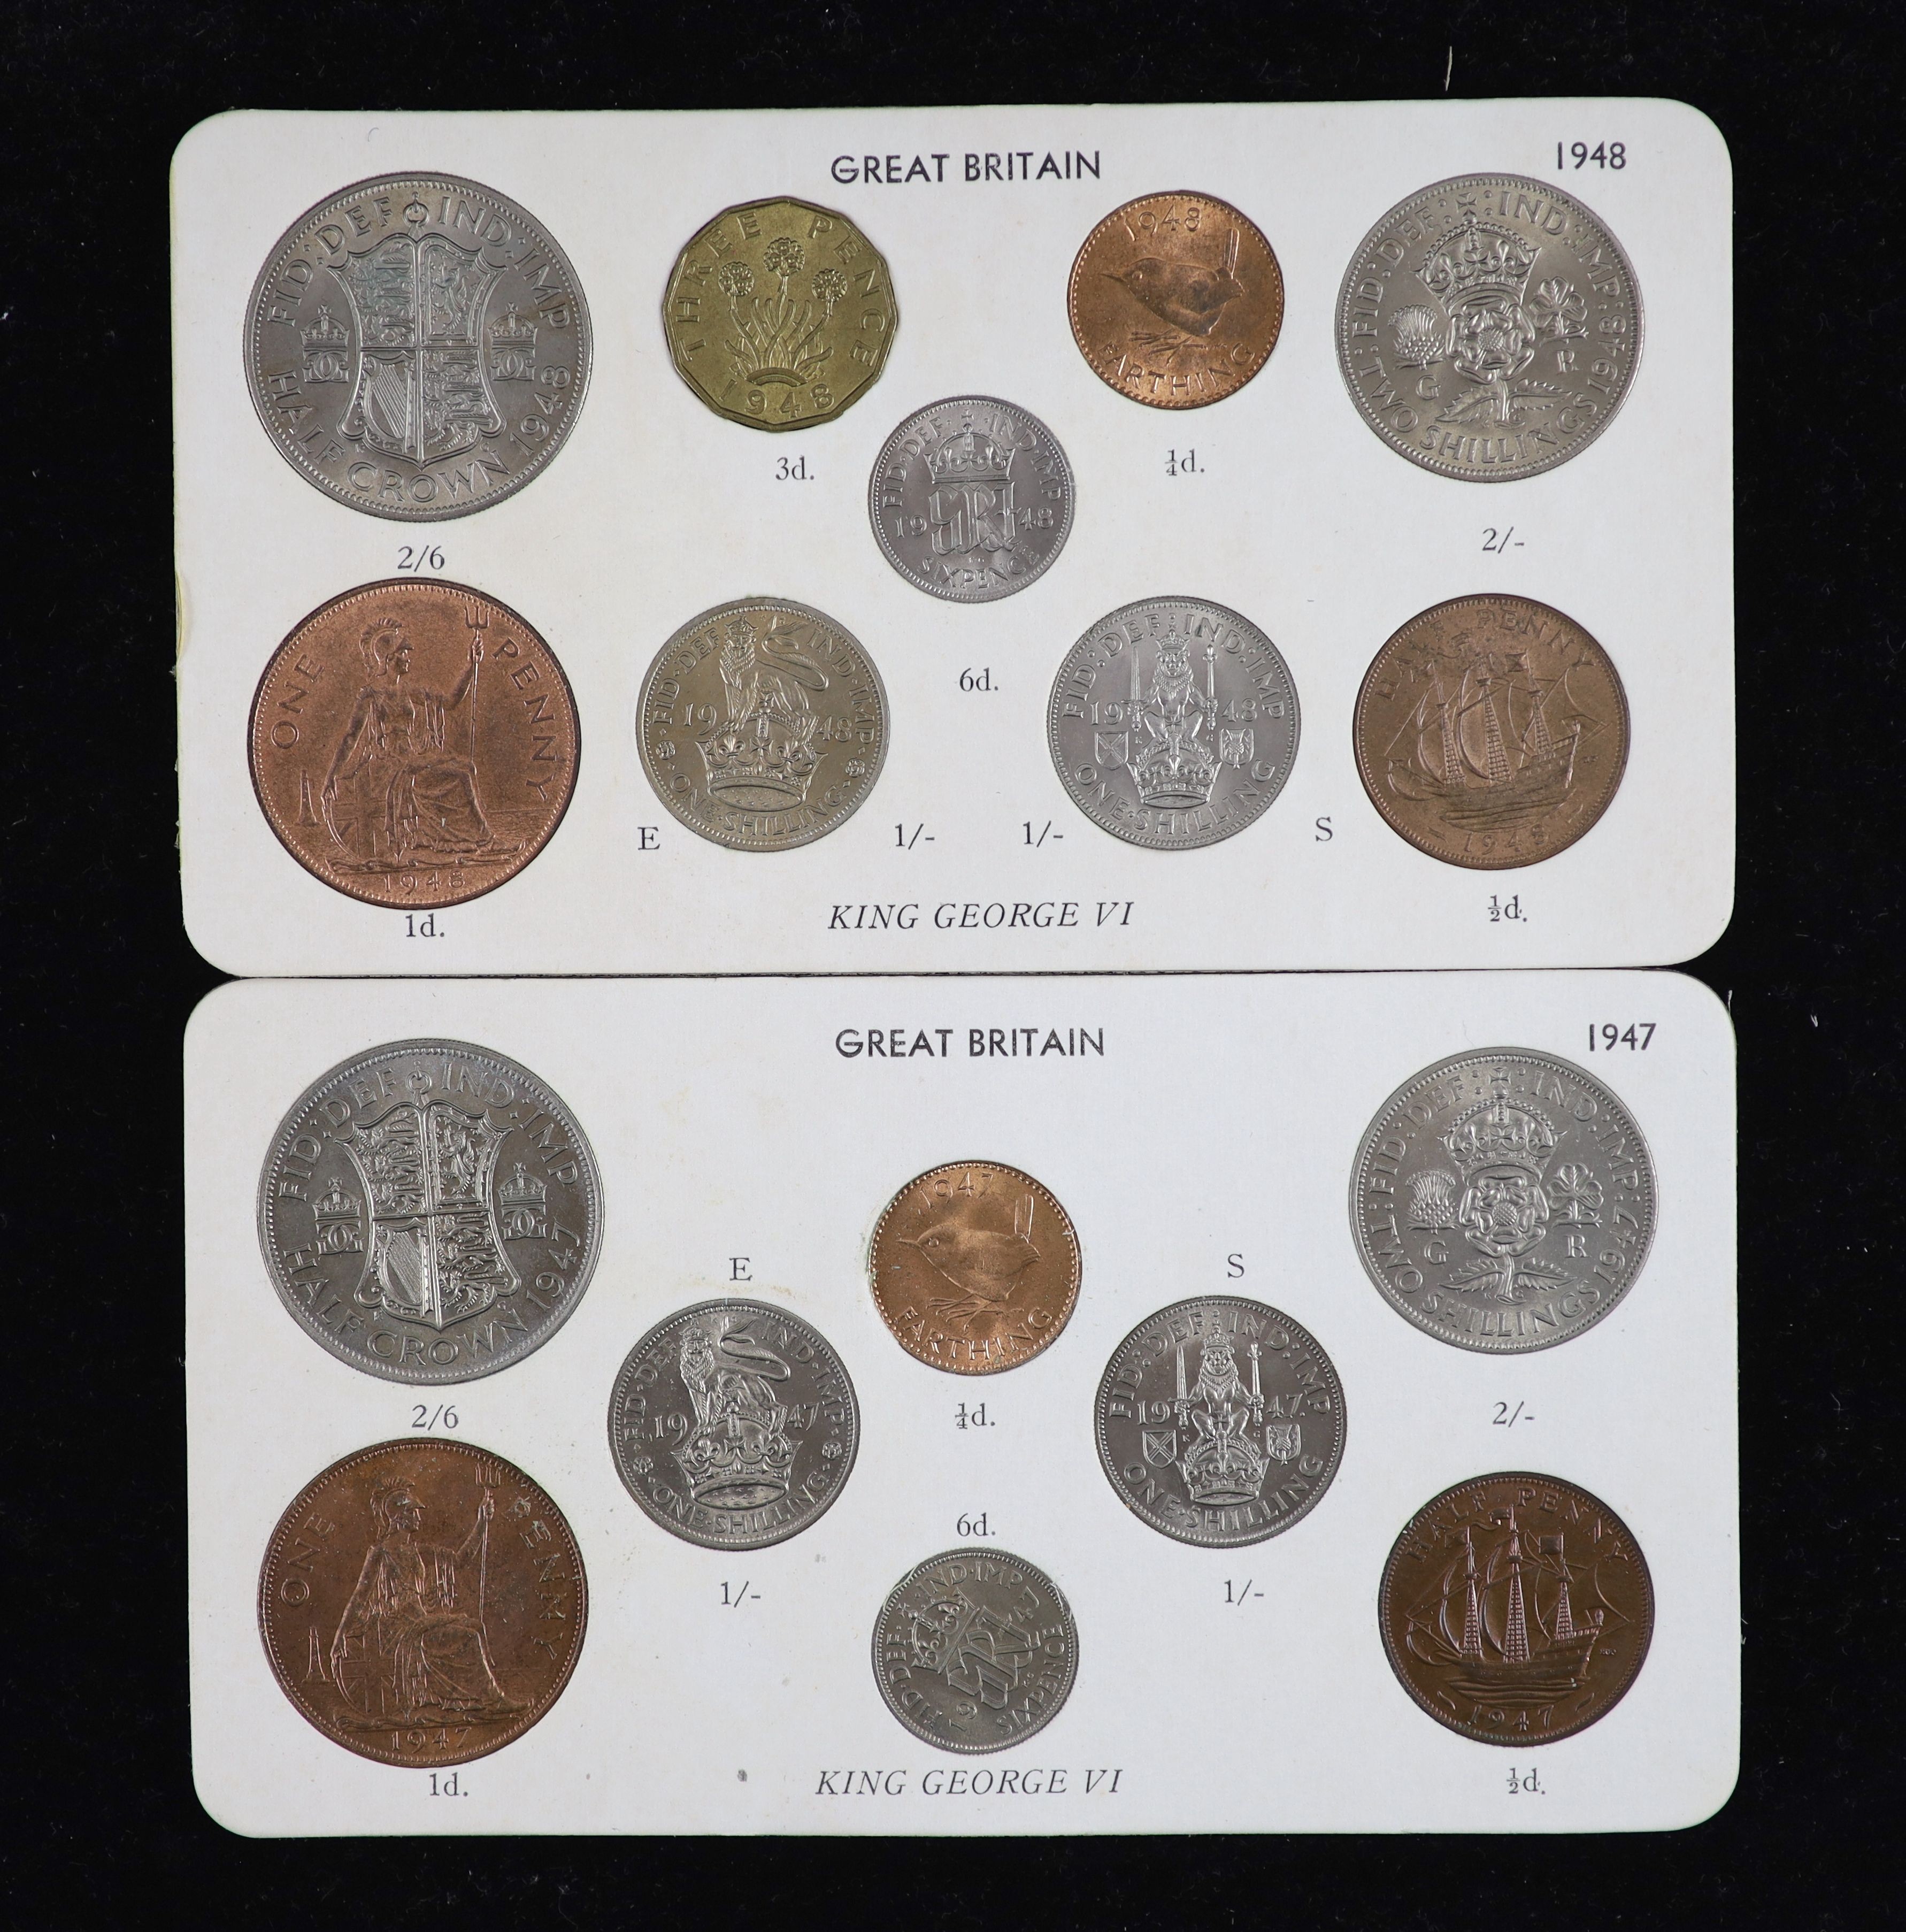 George VI specimen coin sets for 1947 and 1948, first issue, including 1948 brass threepence (S4112), good EF